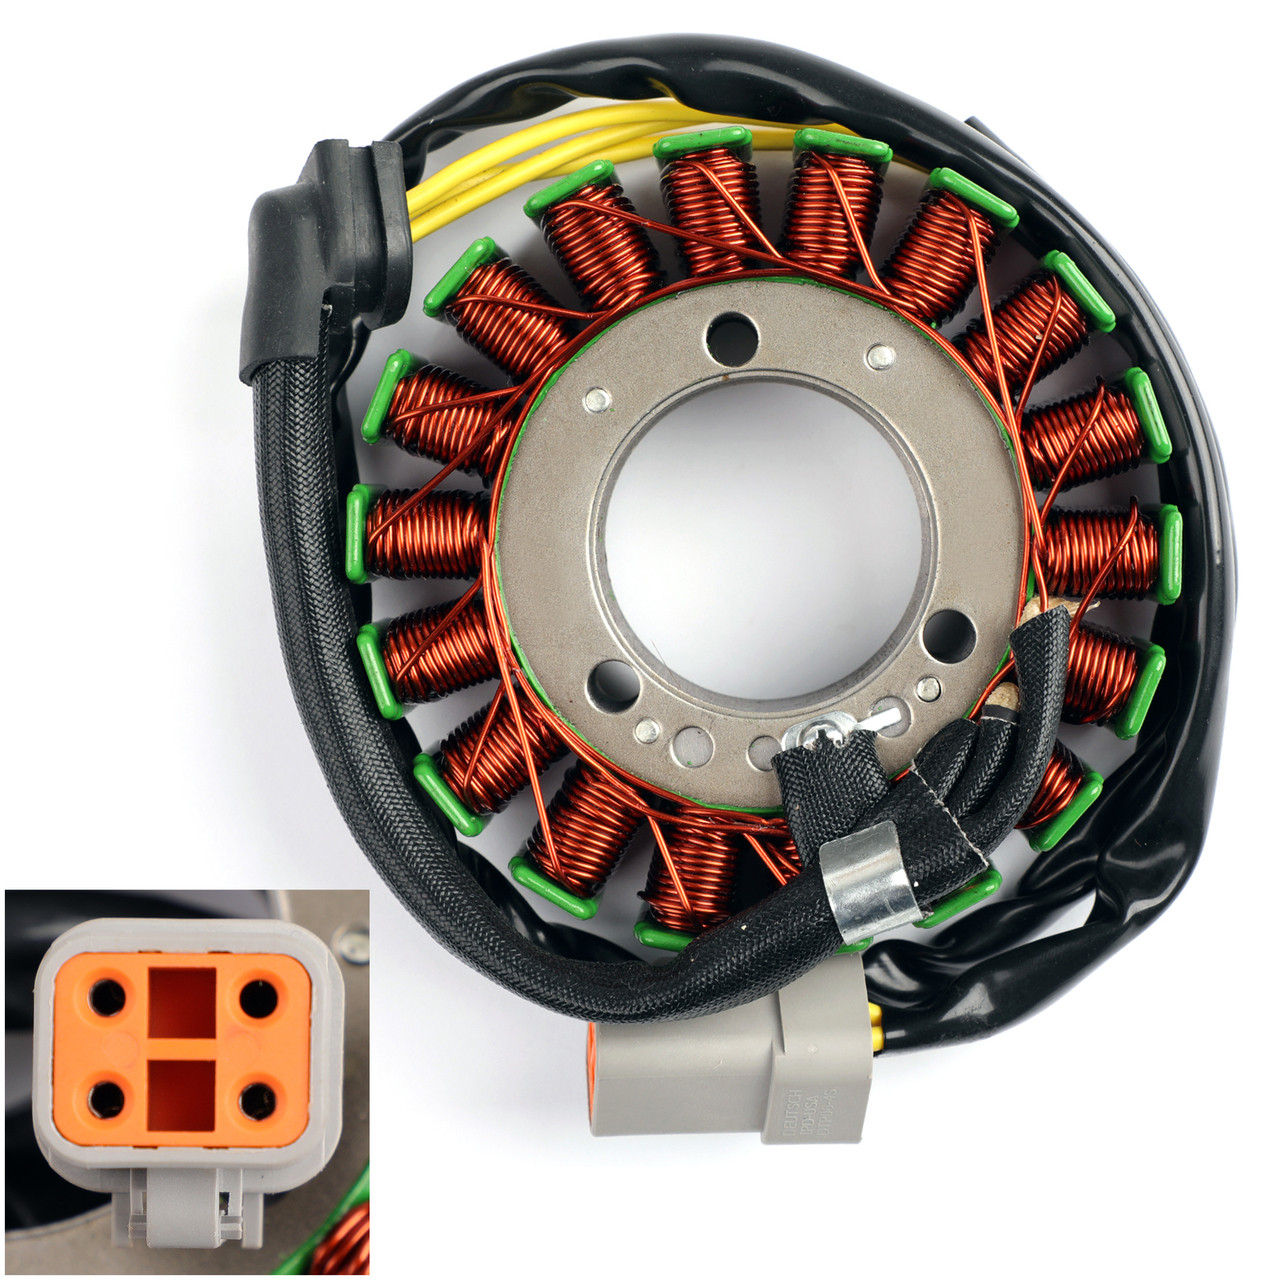 STATOR for Can-am Outlander 650 EFI 06-18 XT 06-09 Max 400 04-15 Max 650 06-18